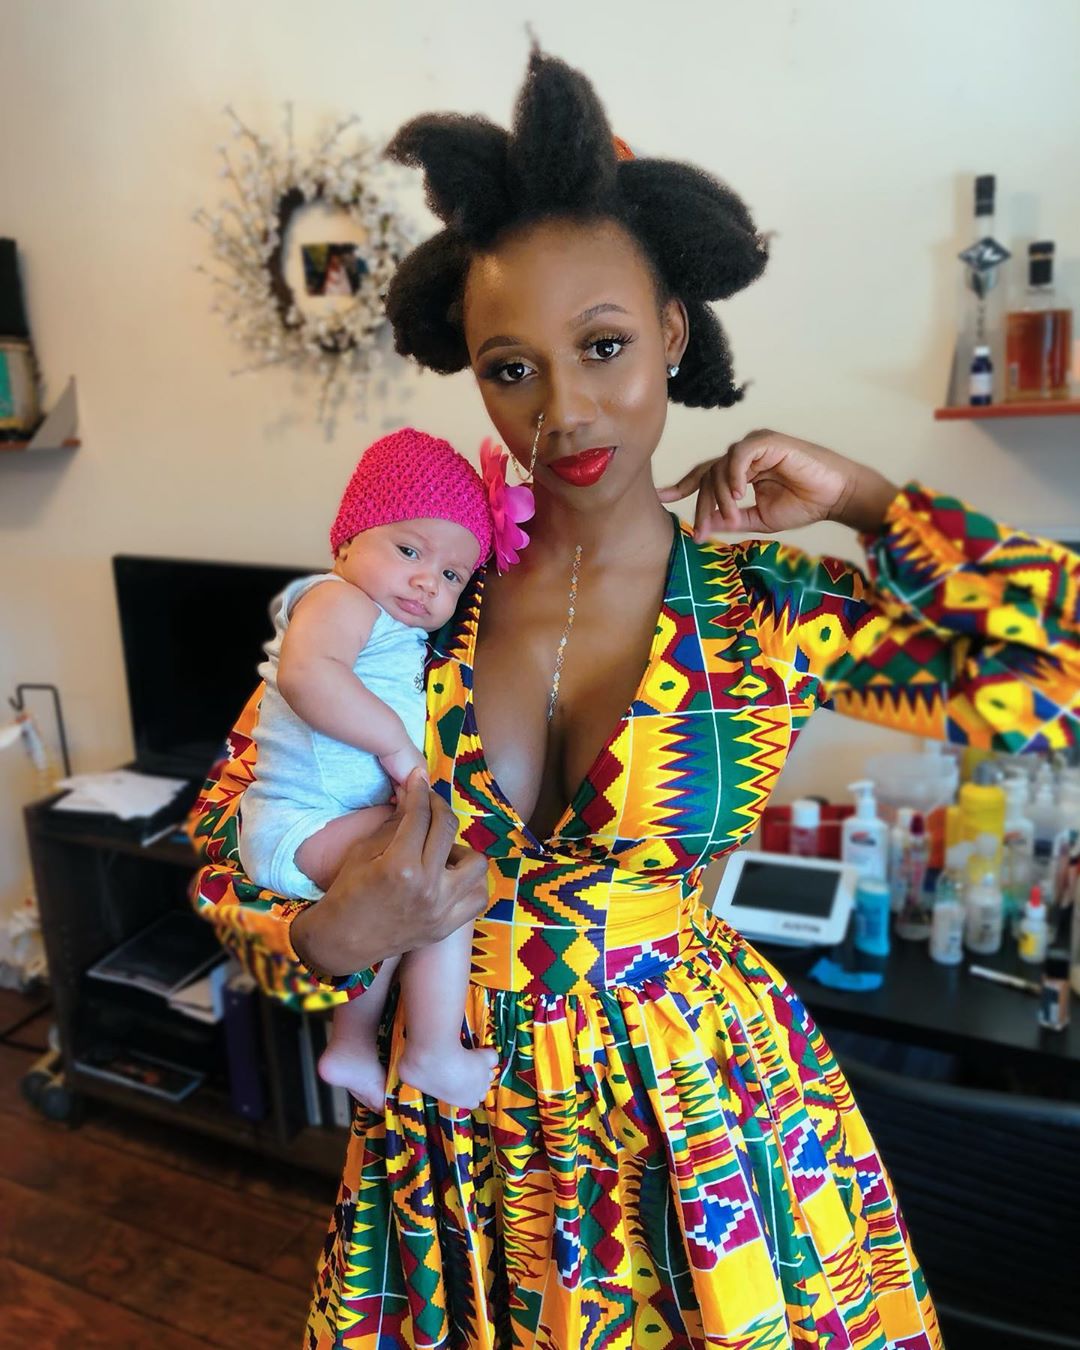 New mum Korra Obidi flaunts cleavage while posing with her super cute baby